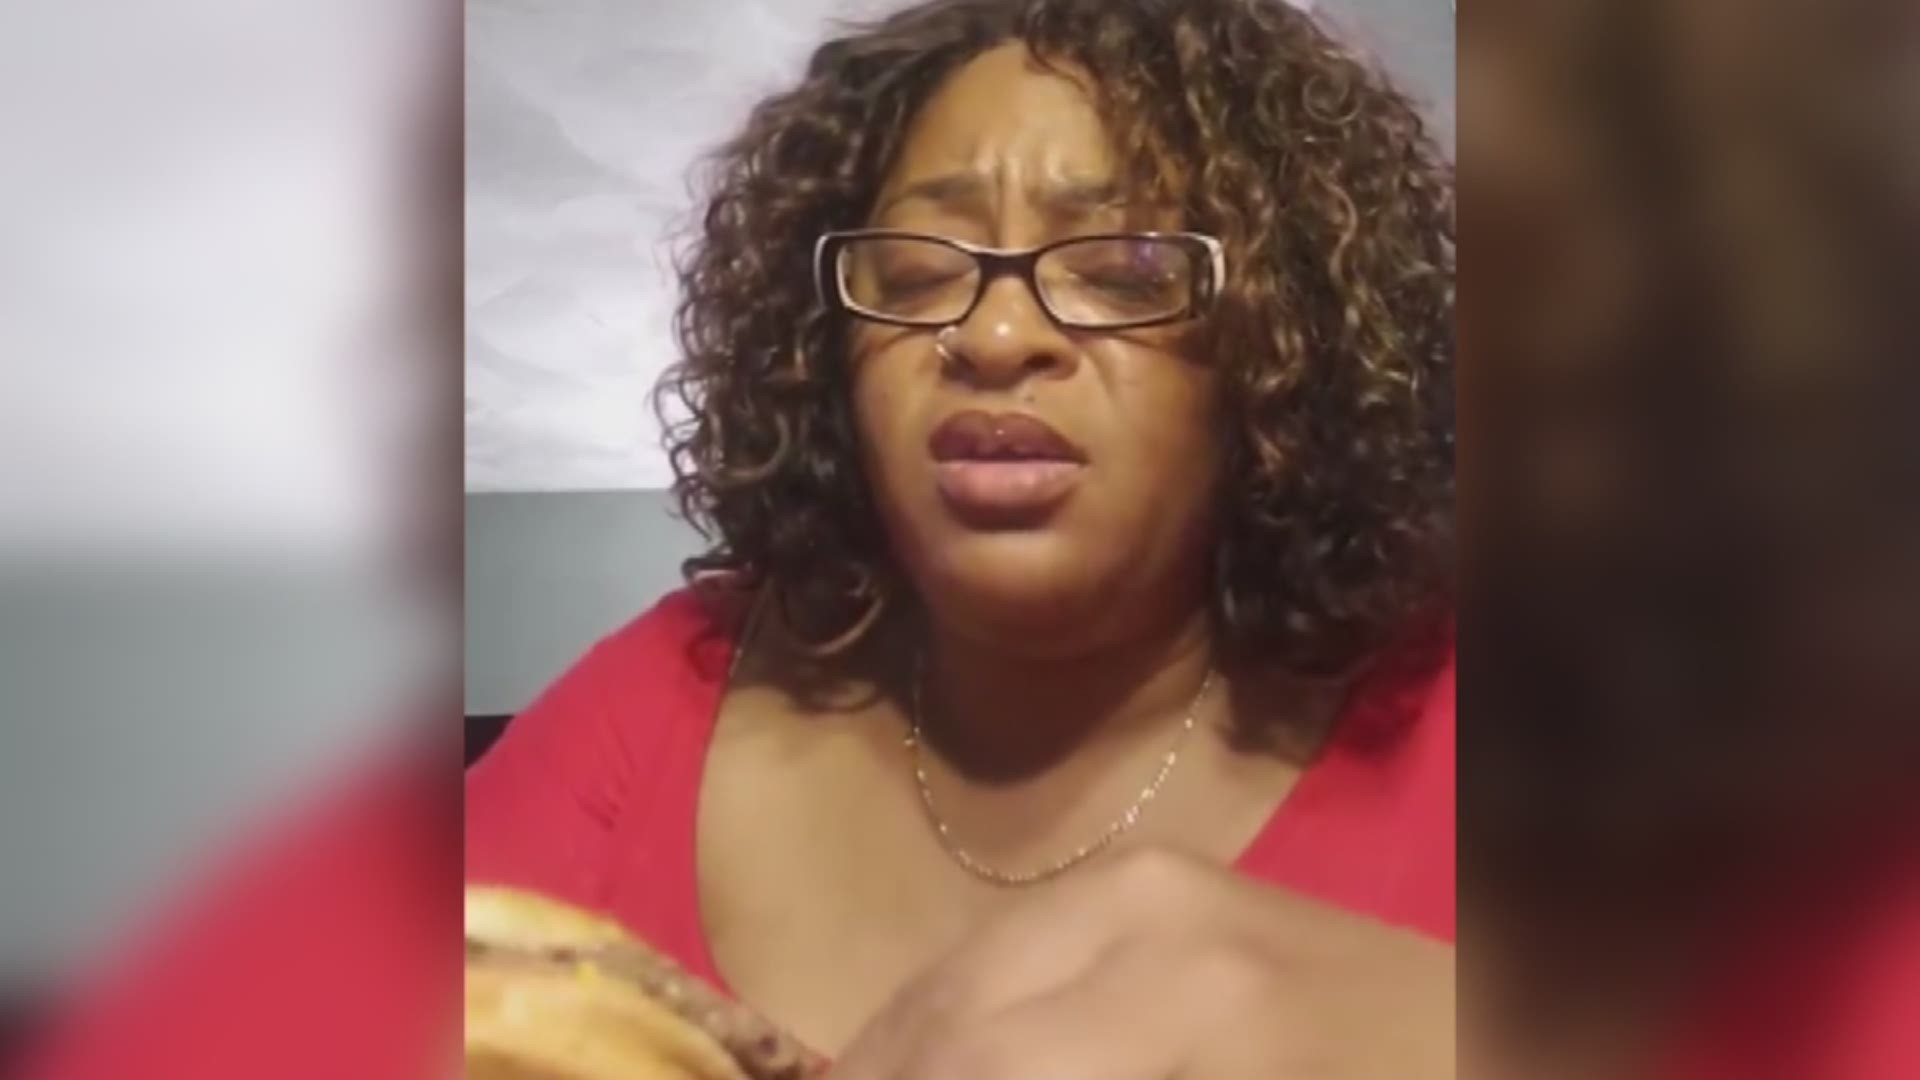 Tecia Williams of  Virginia Beach hadn't had a McDonald's burger for a long time. Her husband talked her into trying the fresh meat Quarter Pounder. It was so good, she HAD to take her wig off to enjoy it. Williams shared the proof with 13News Now.